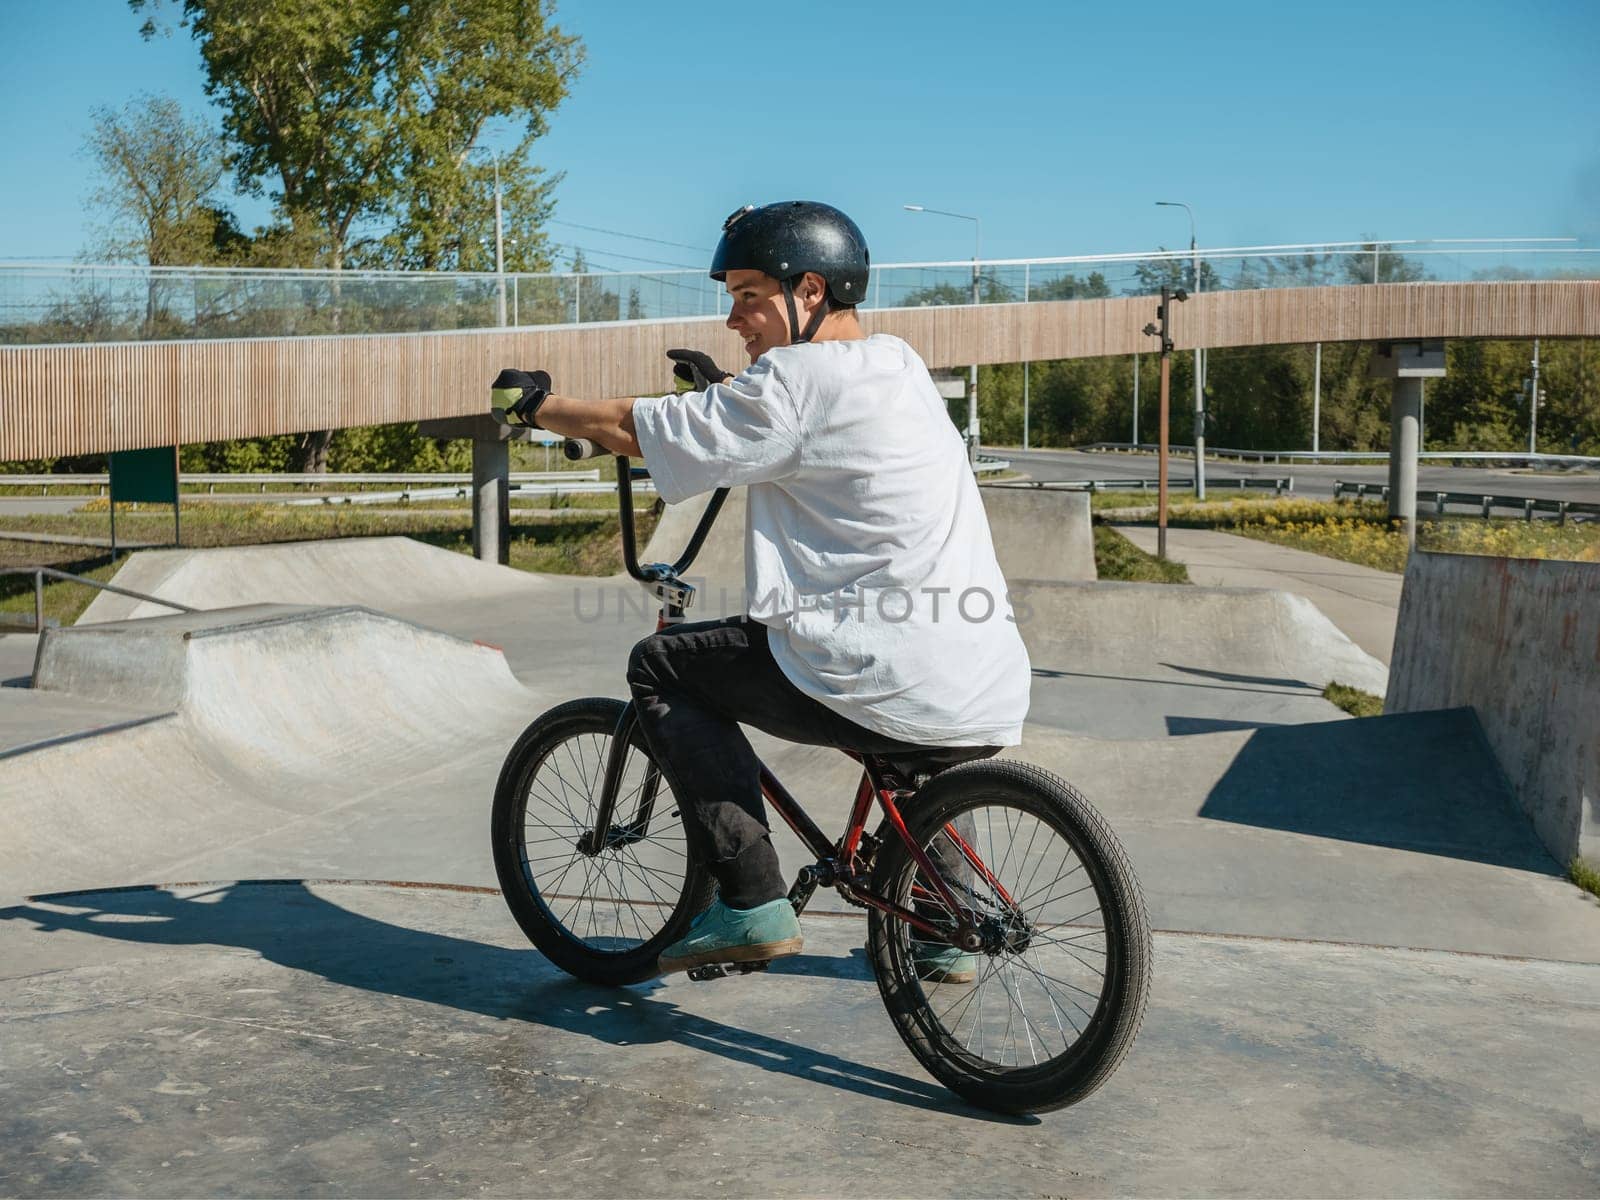 Smiling young bmx rider sitting on bmx bike in skatepark. Side view full body portrait of happy smiling bmx rider in protection helmet, gloves and leg protection. Young BMX bicycle rider having fun and posing